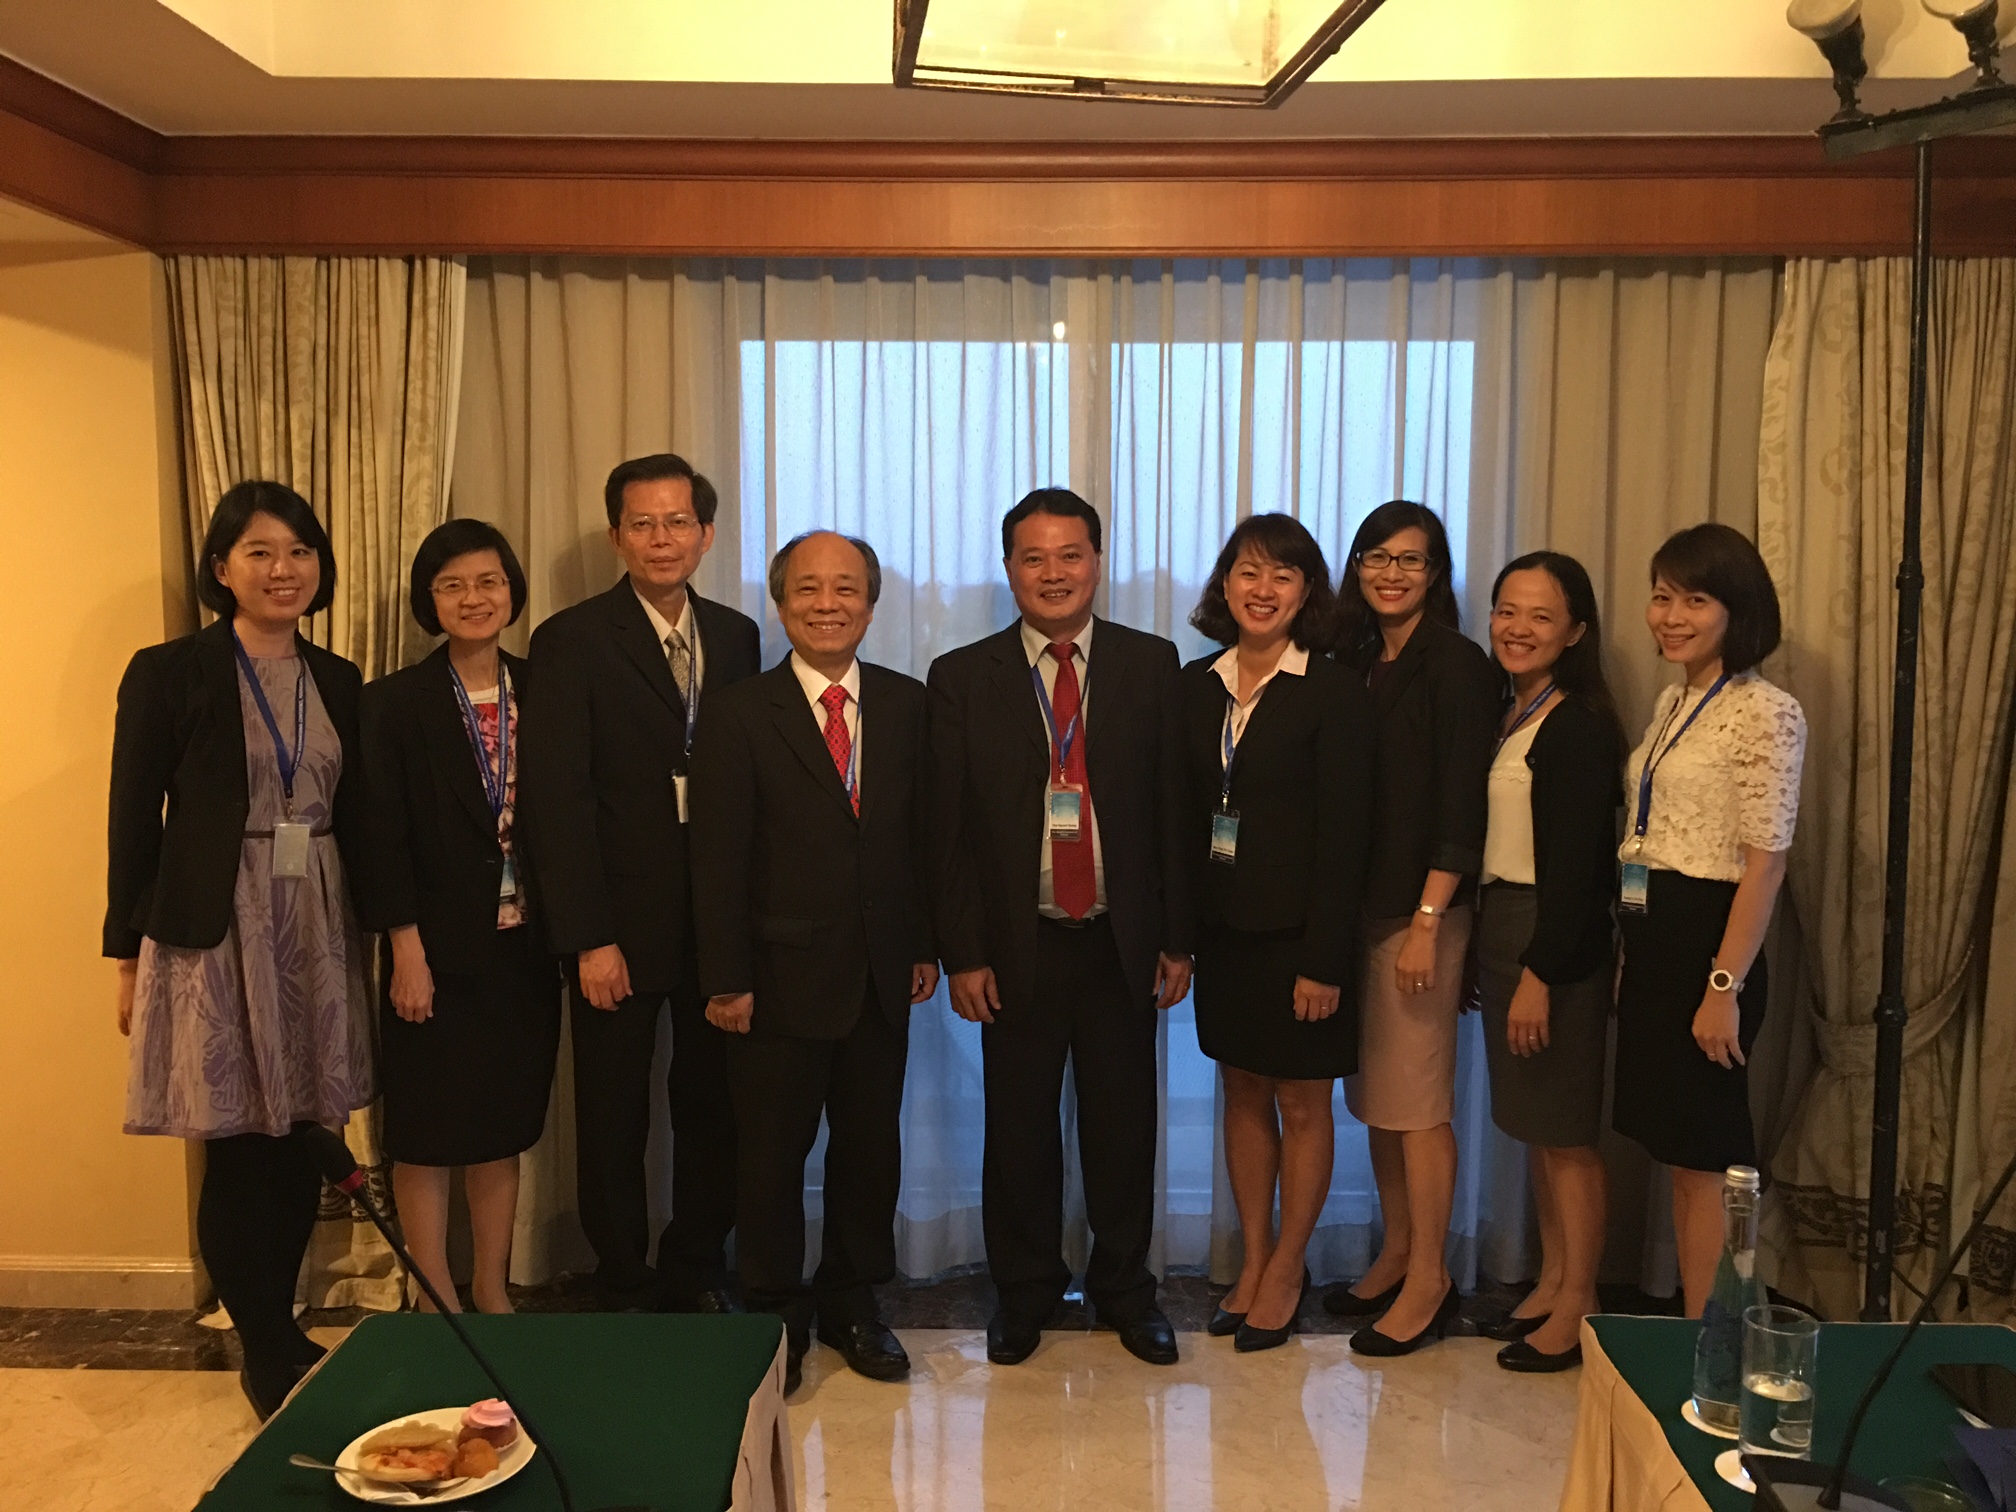 Photo after a CDIC-DIV bilateral meeting—CDIC President Michael Lin (4th from the left) and EVP William Su (3rd from the left) with the DIV Chairman Quang Huy Nguyen (5th from the right) and their staffs